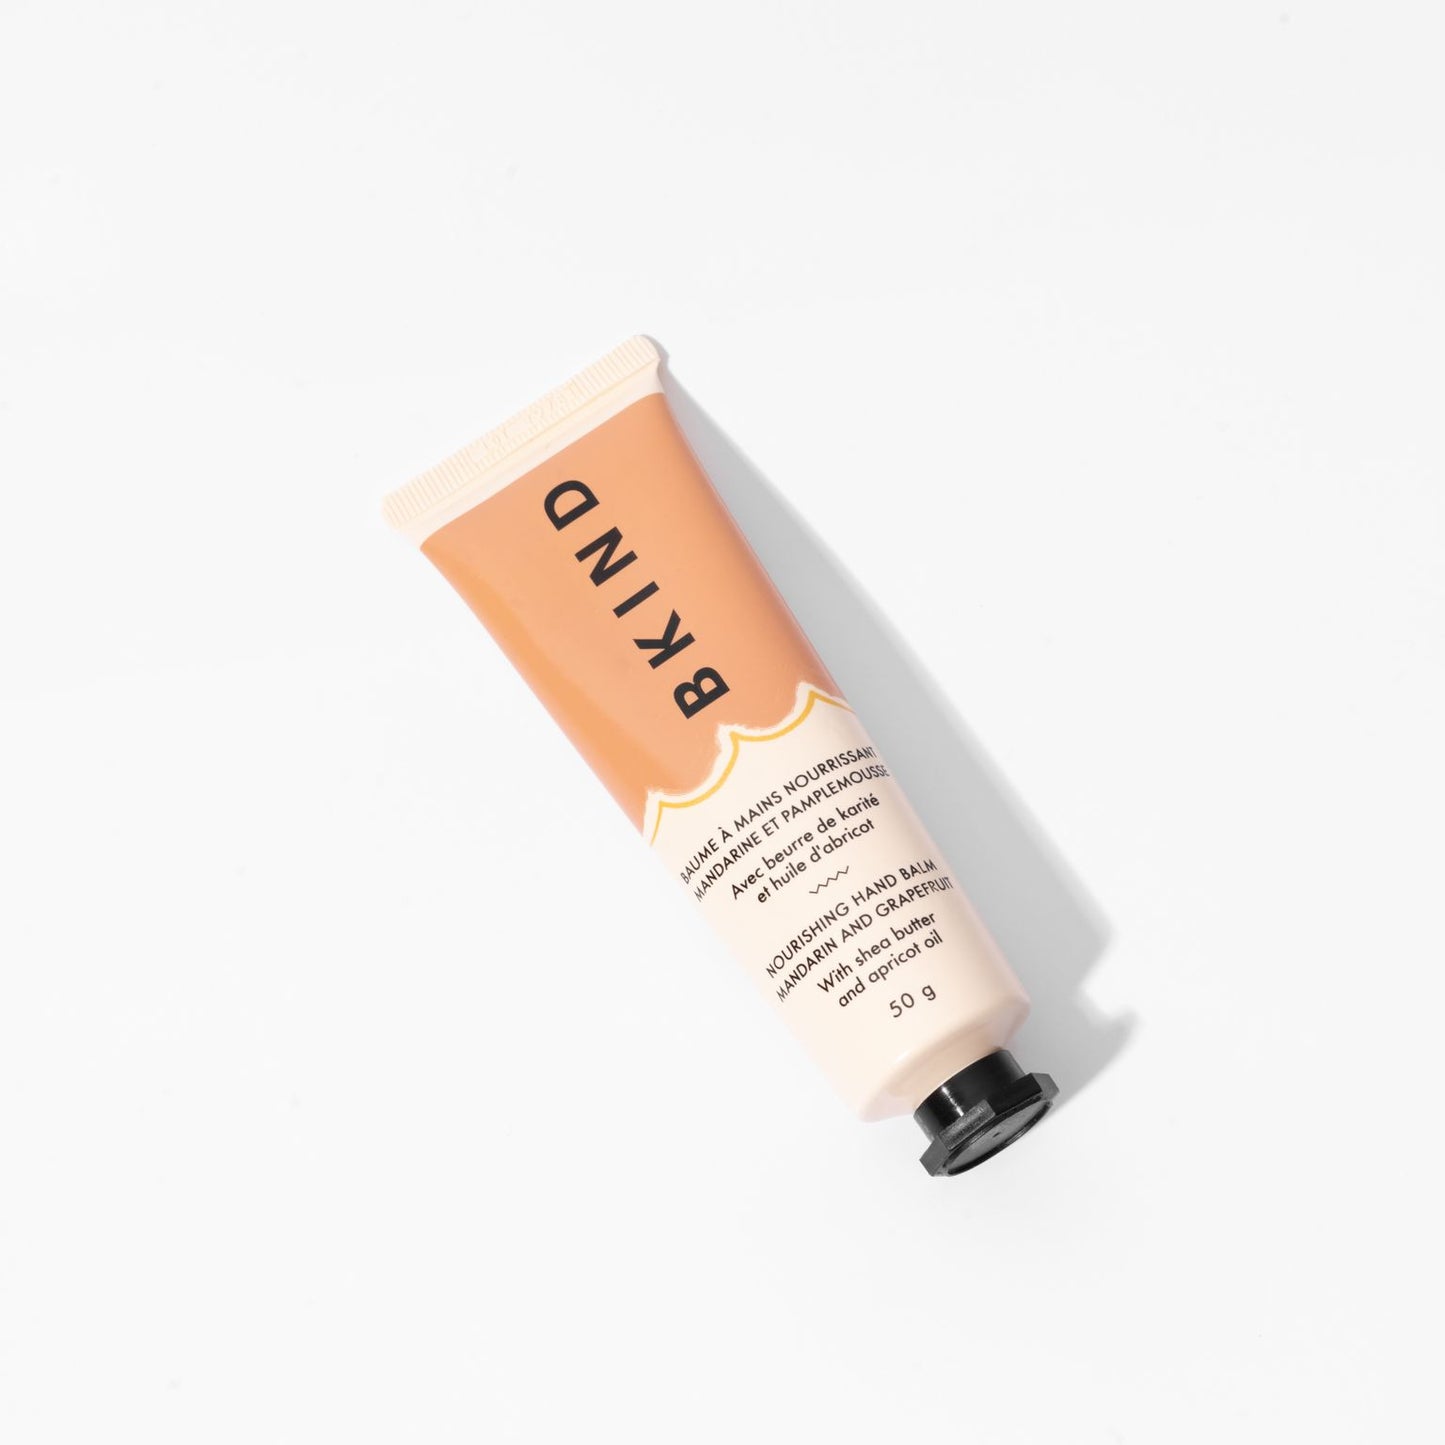 
                  
                    BKIND - Nourishing hand balm - Mandarin and Grapefruit is displayed on a white background with the orange/brown tube lying down with vertical writing of BKIND on the label.
                  
                